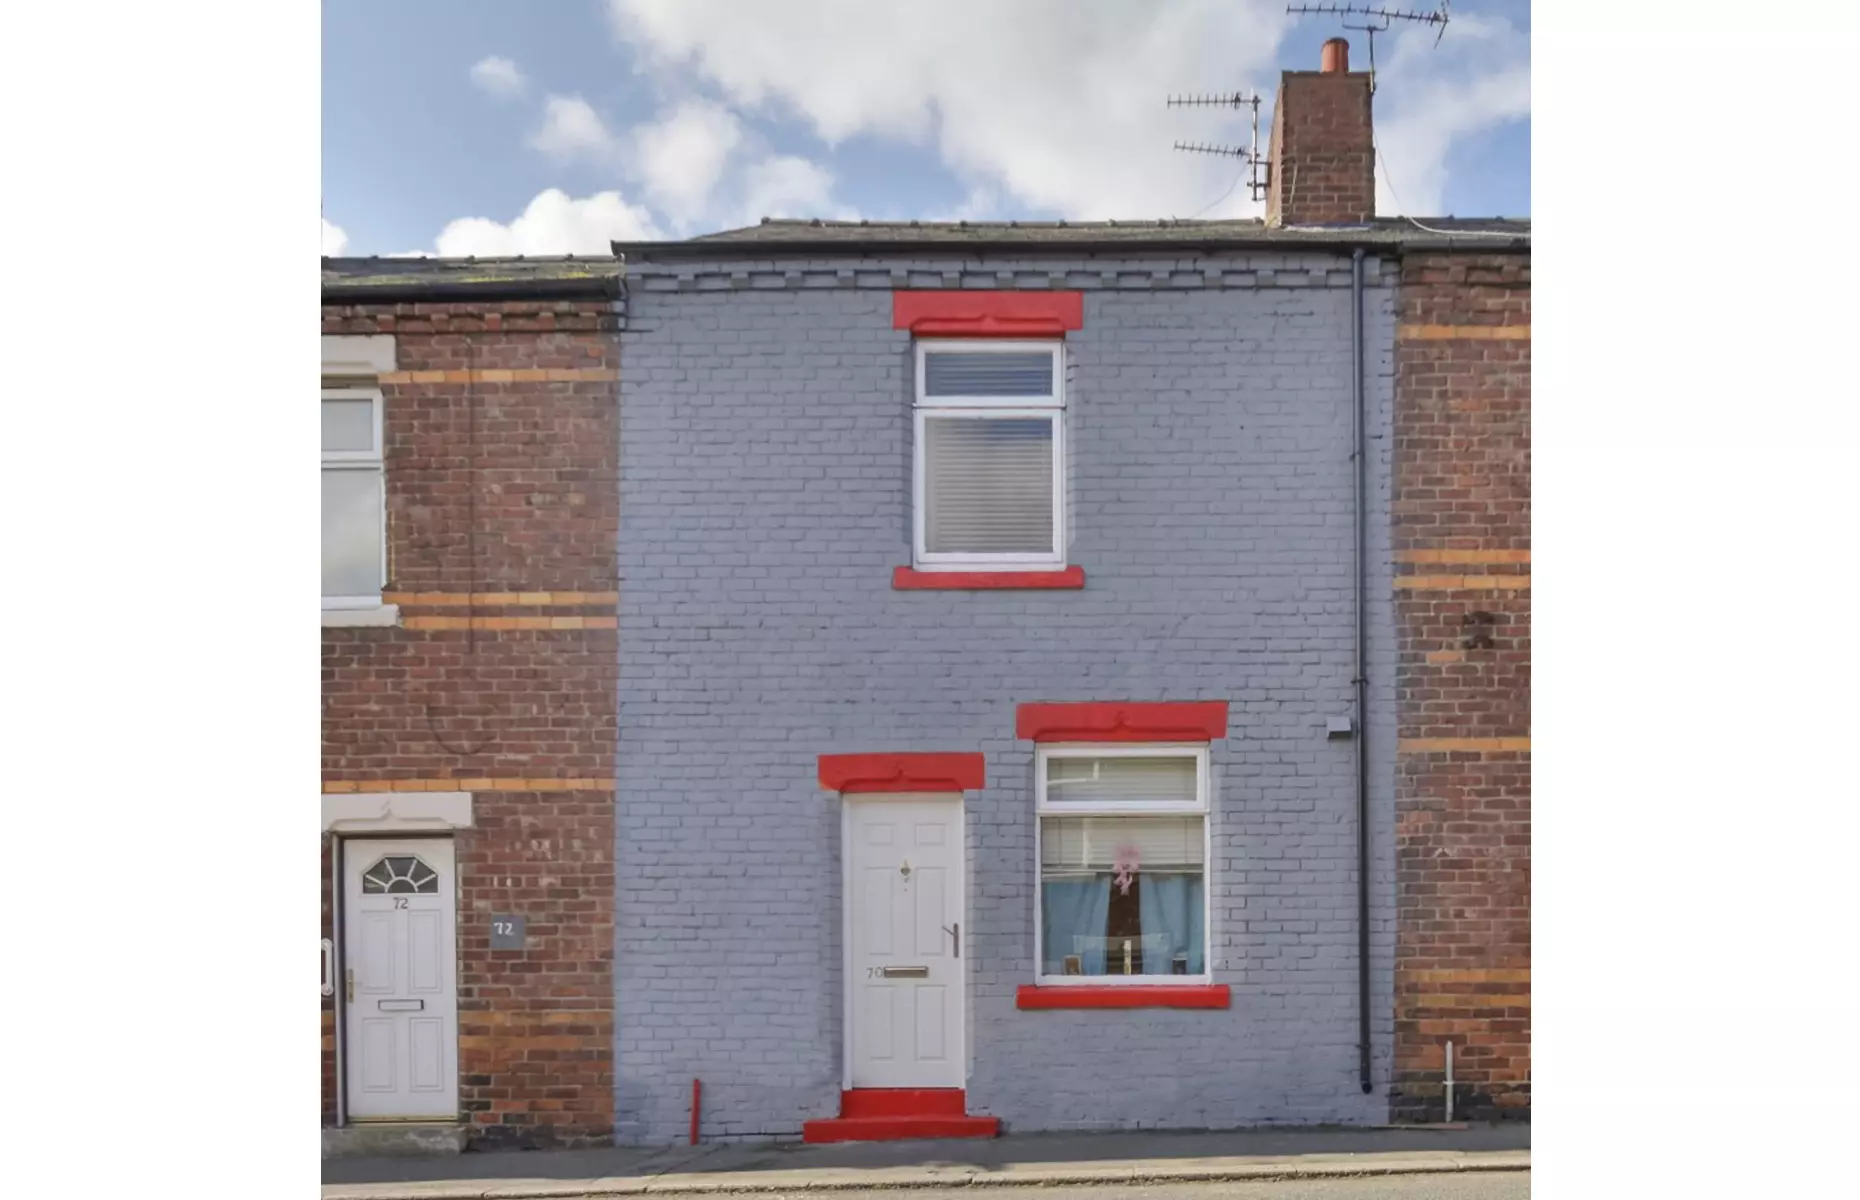 Located in County Durham, this distinctive property features a quirky, colorful facade.